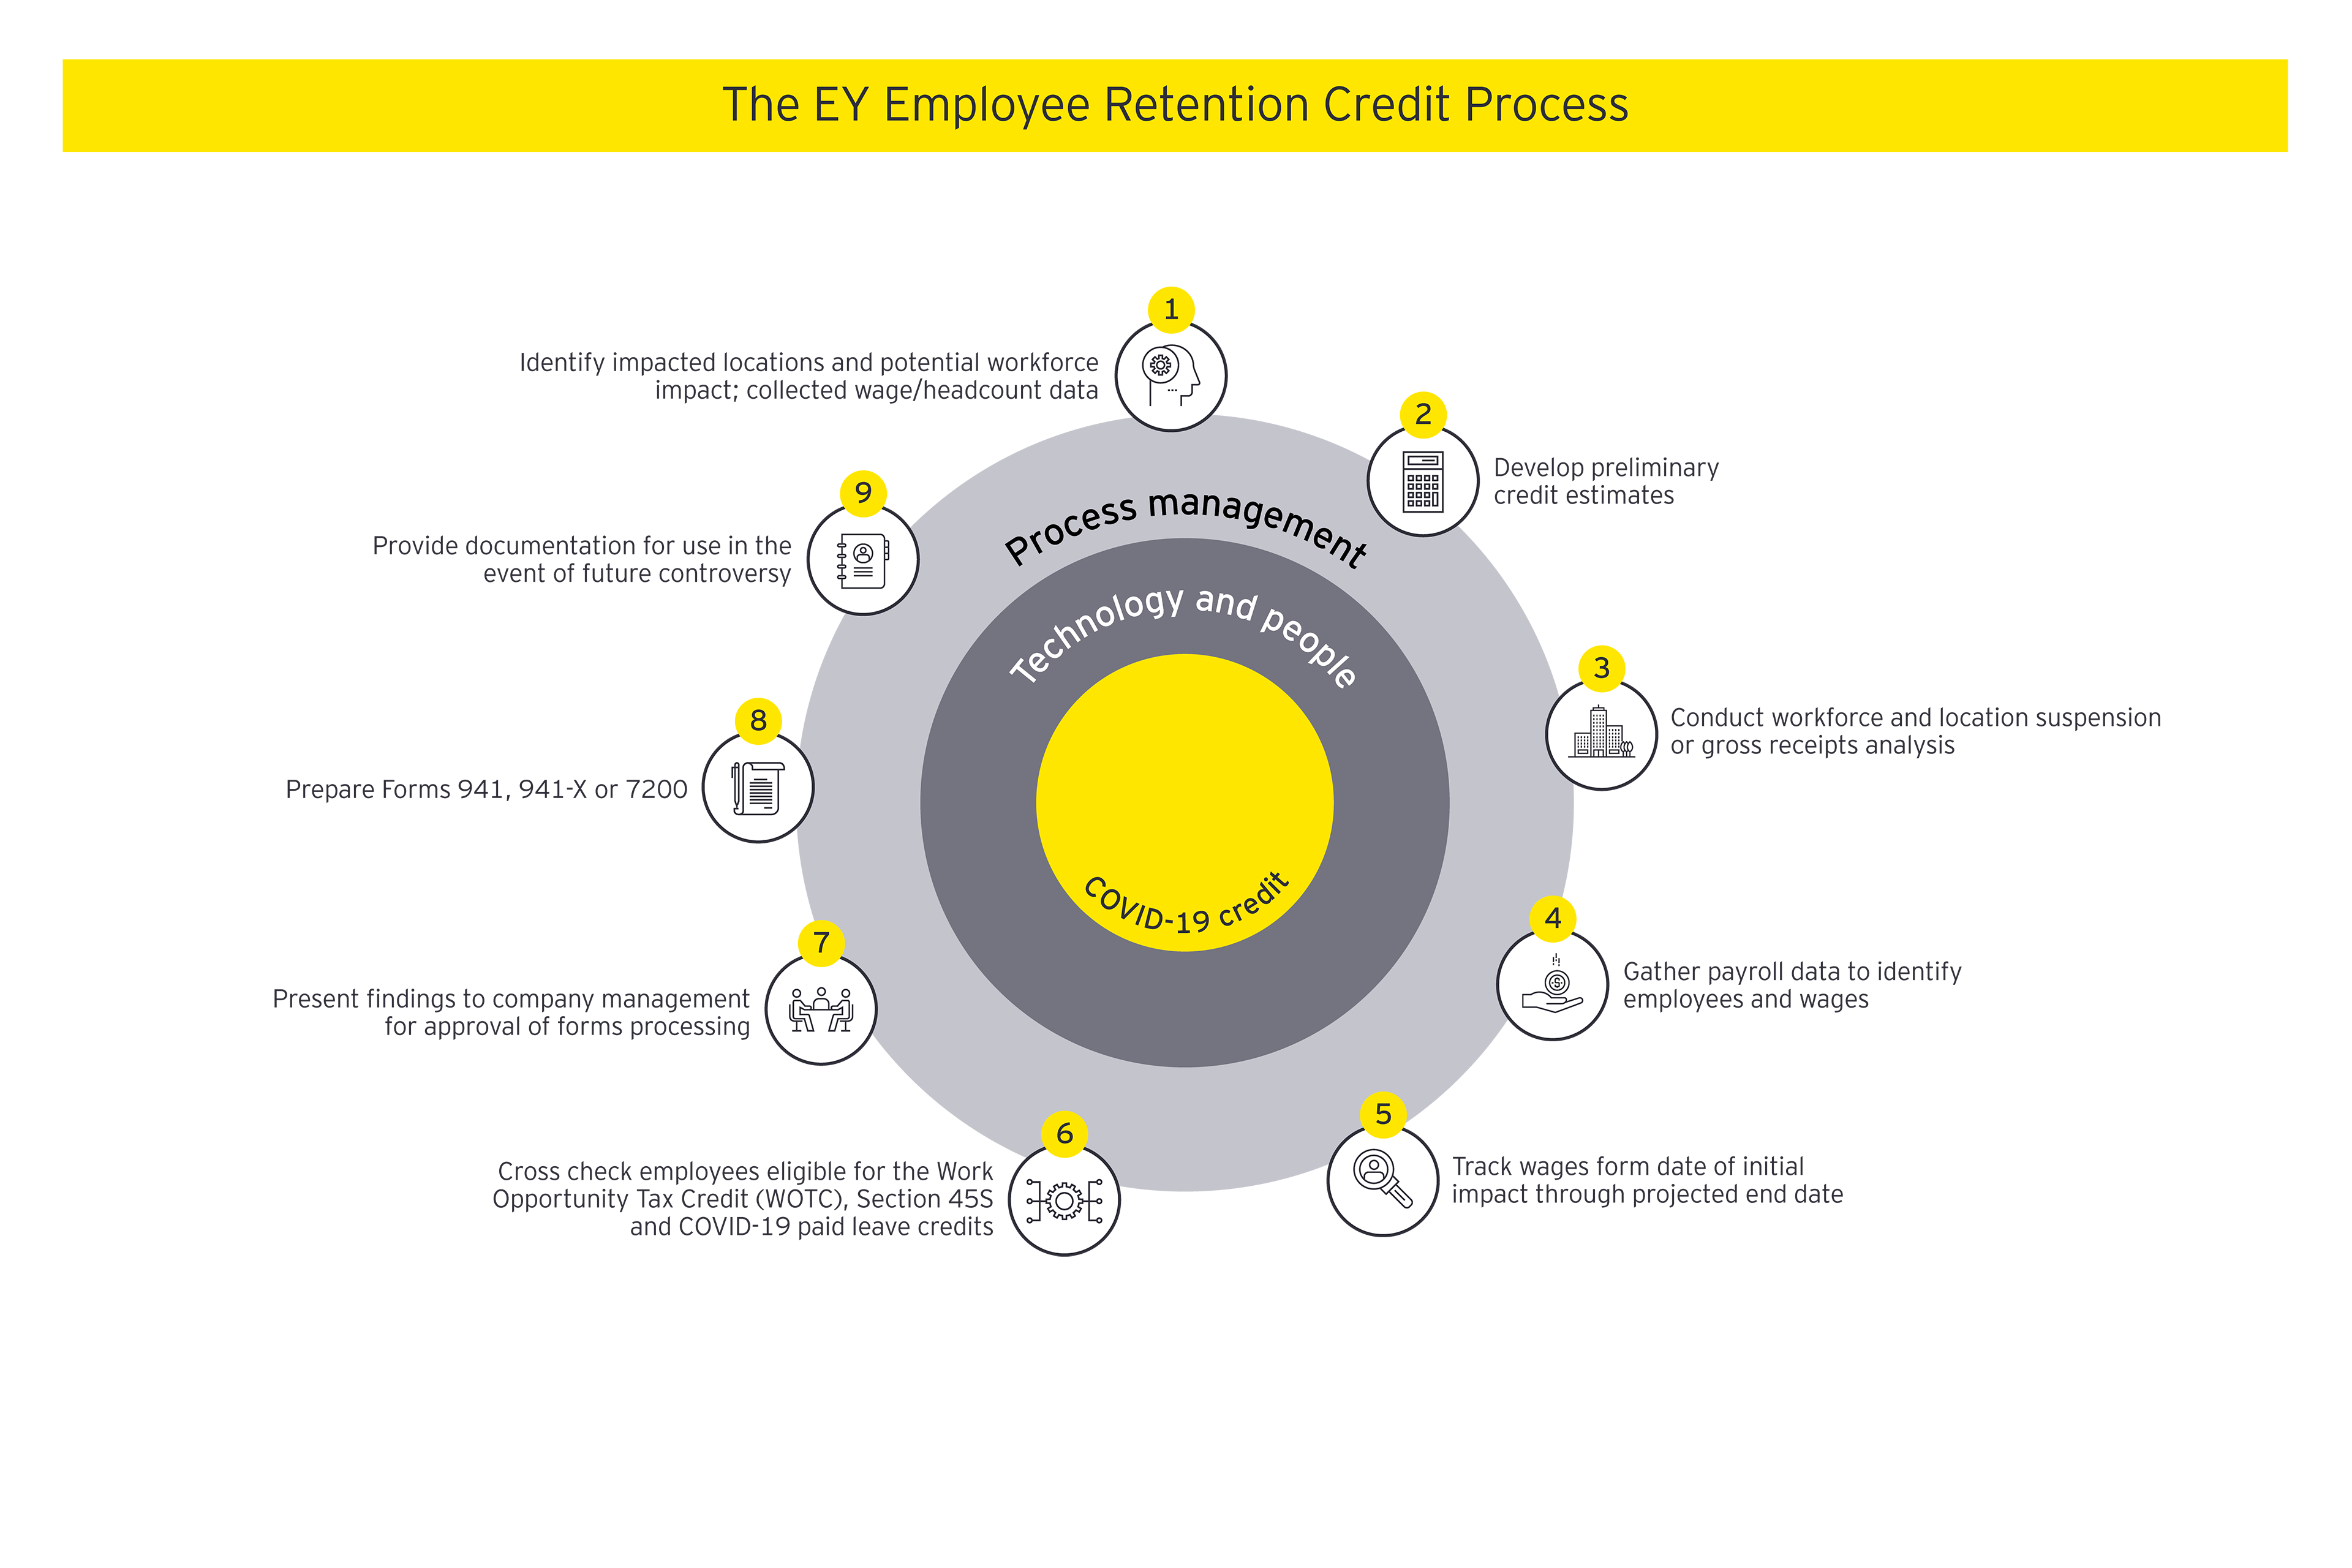 The EY Employee Retention Credit Process